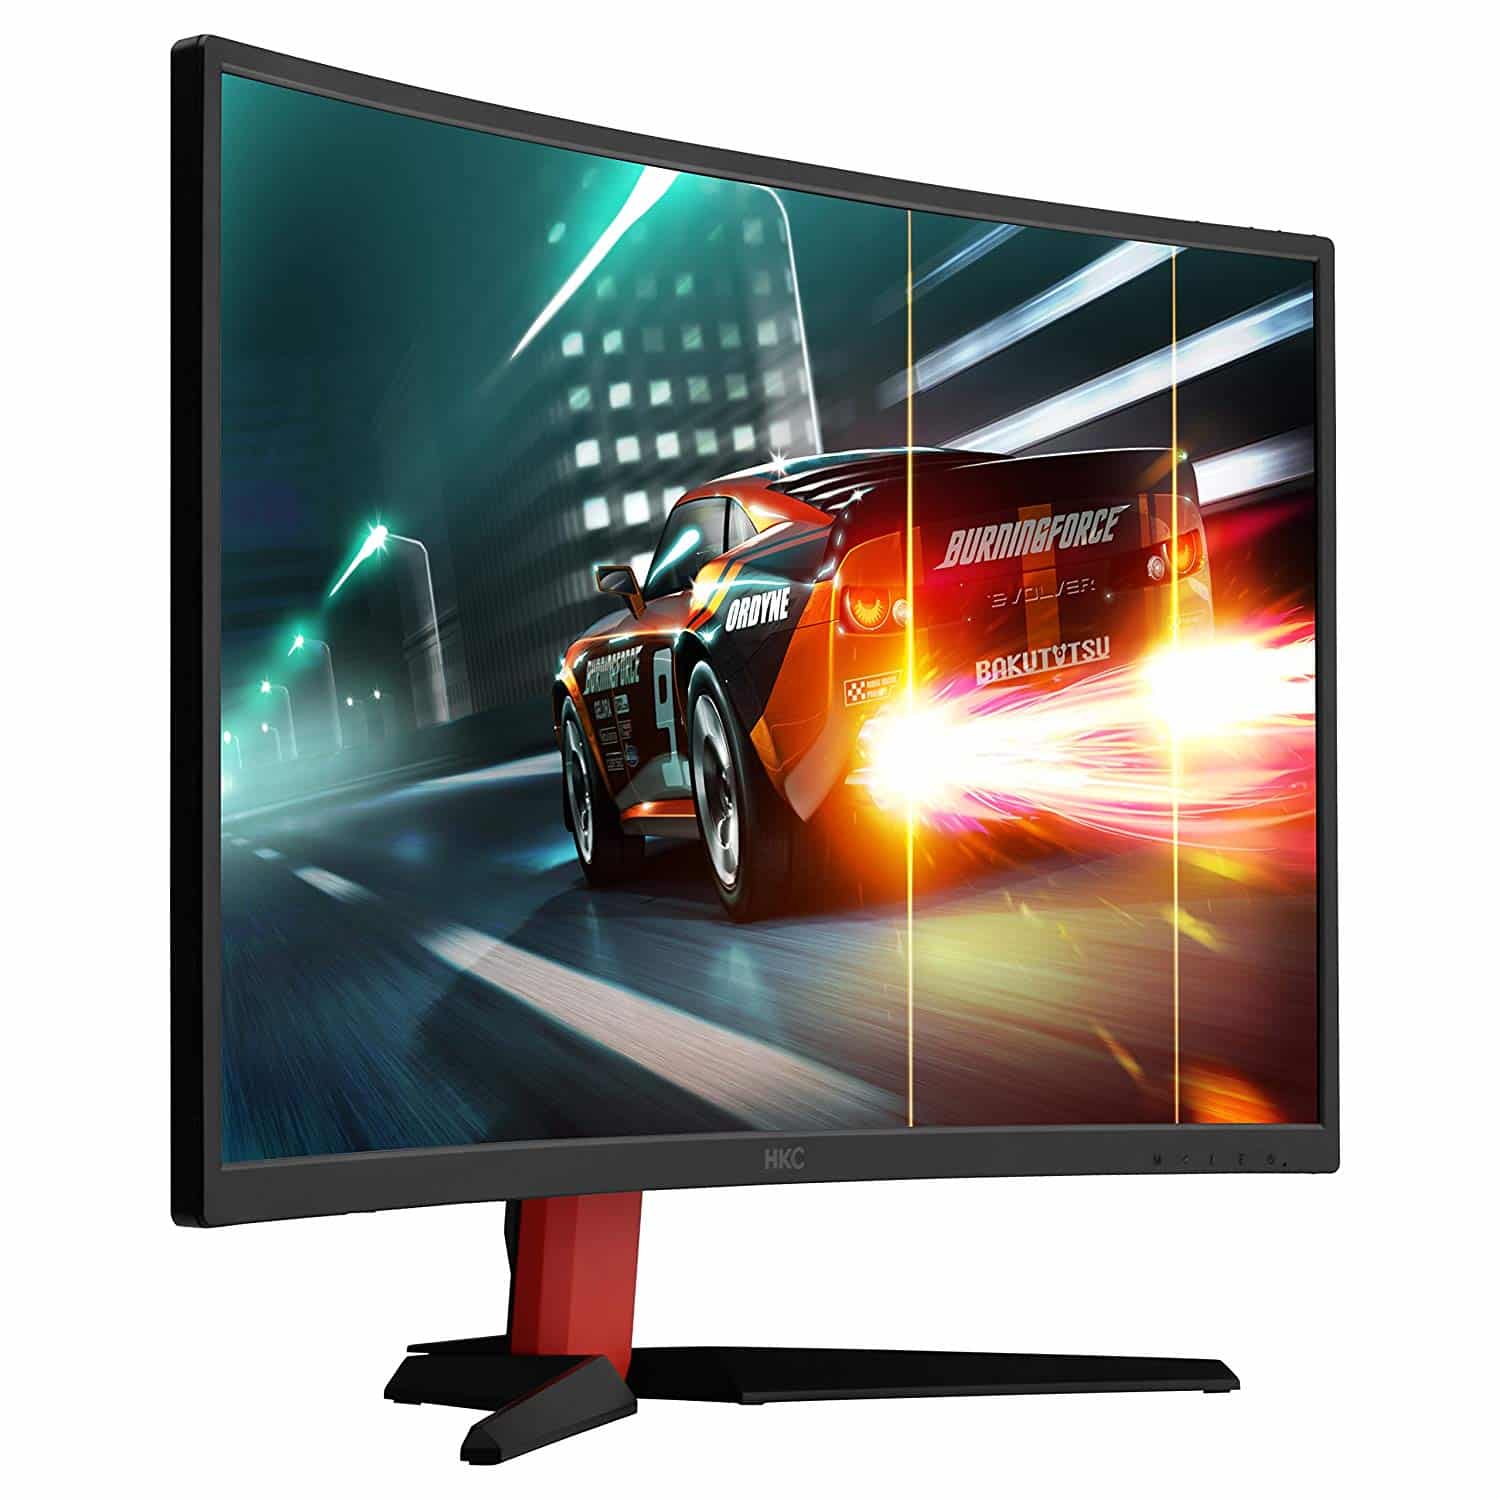 HKC G27 27″ LED Gaming Monitor Curved 1800R 144Hz Full-HD 1920×1080